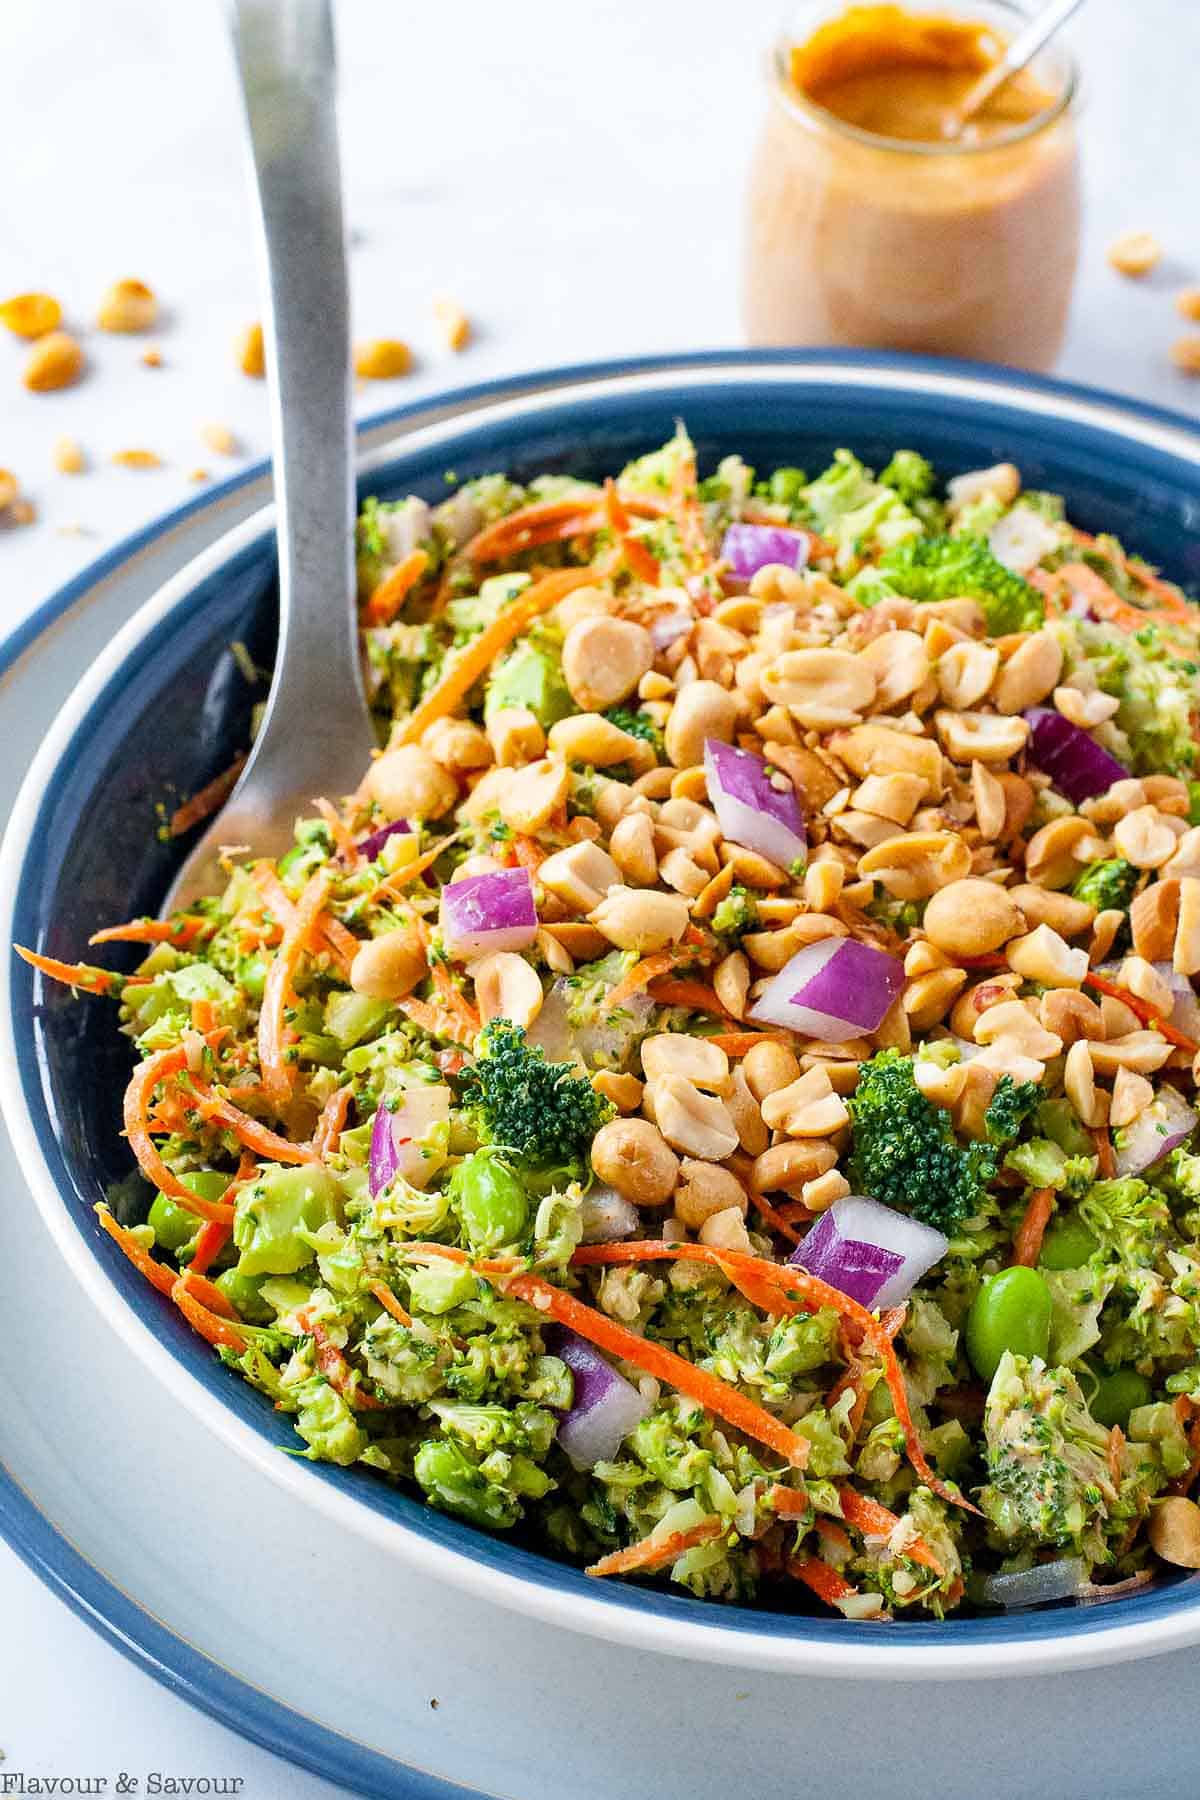 Broccoli Salad topped with roasted peanuts